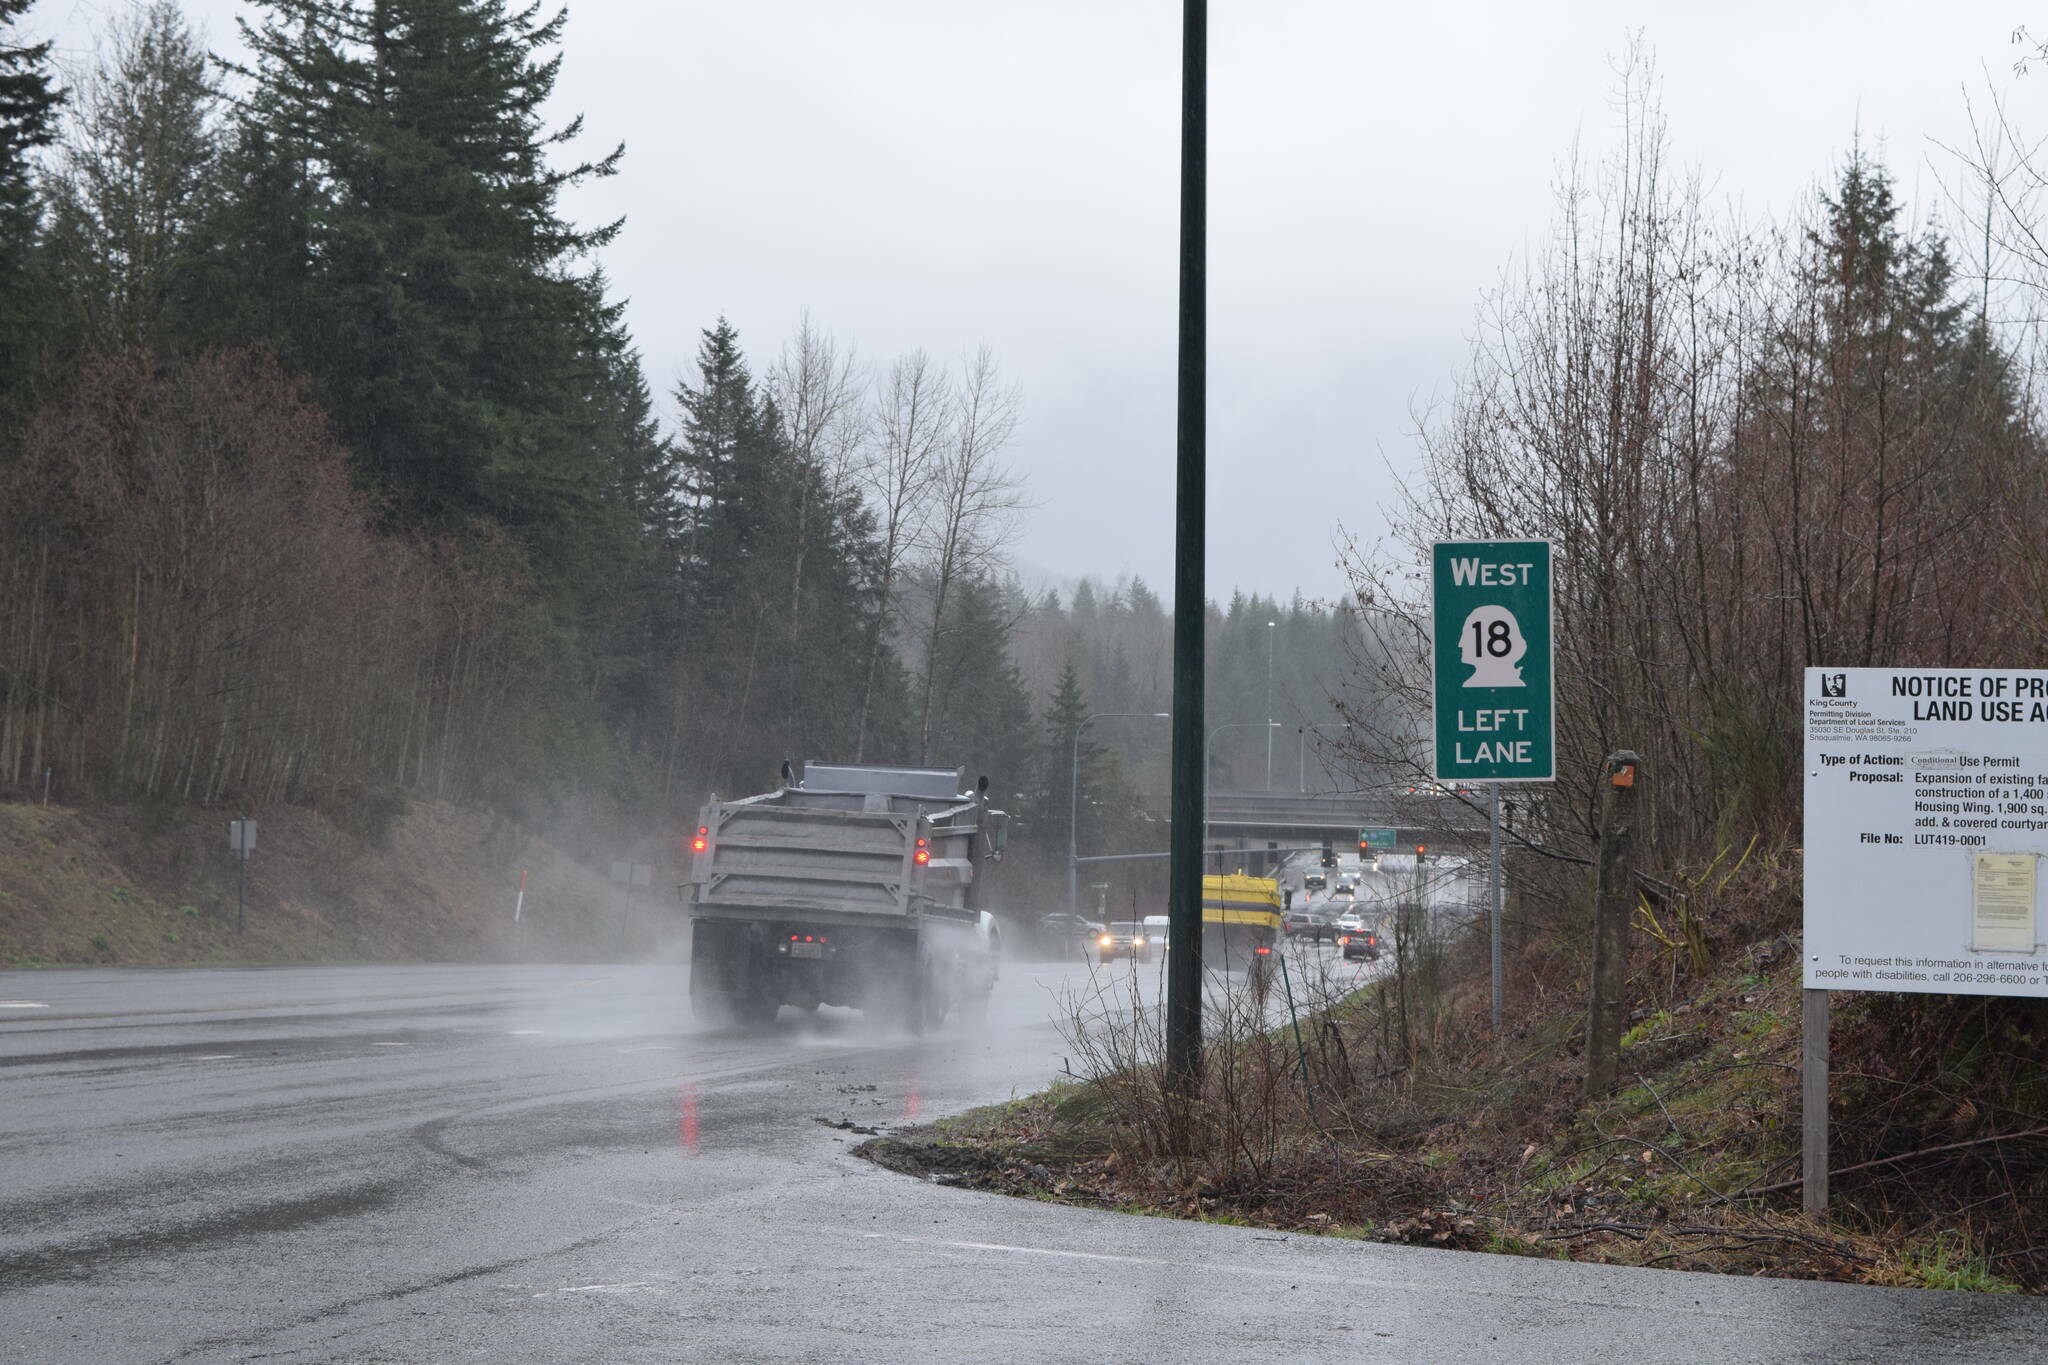 A State Route 18 sign in Snoqualmie before the SR 18/I-90 interchange. File photo by Conor Wilson/Sound Publishing